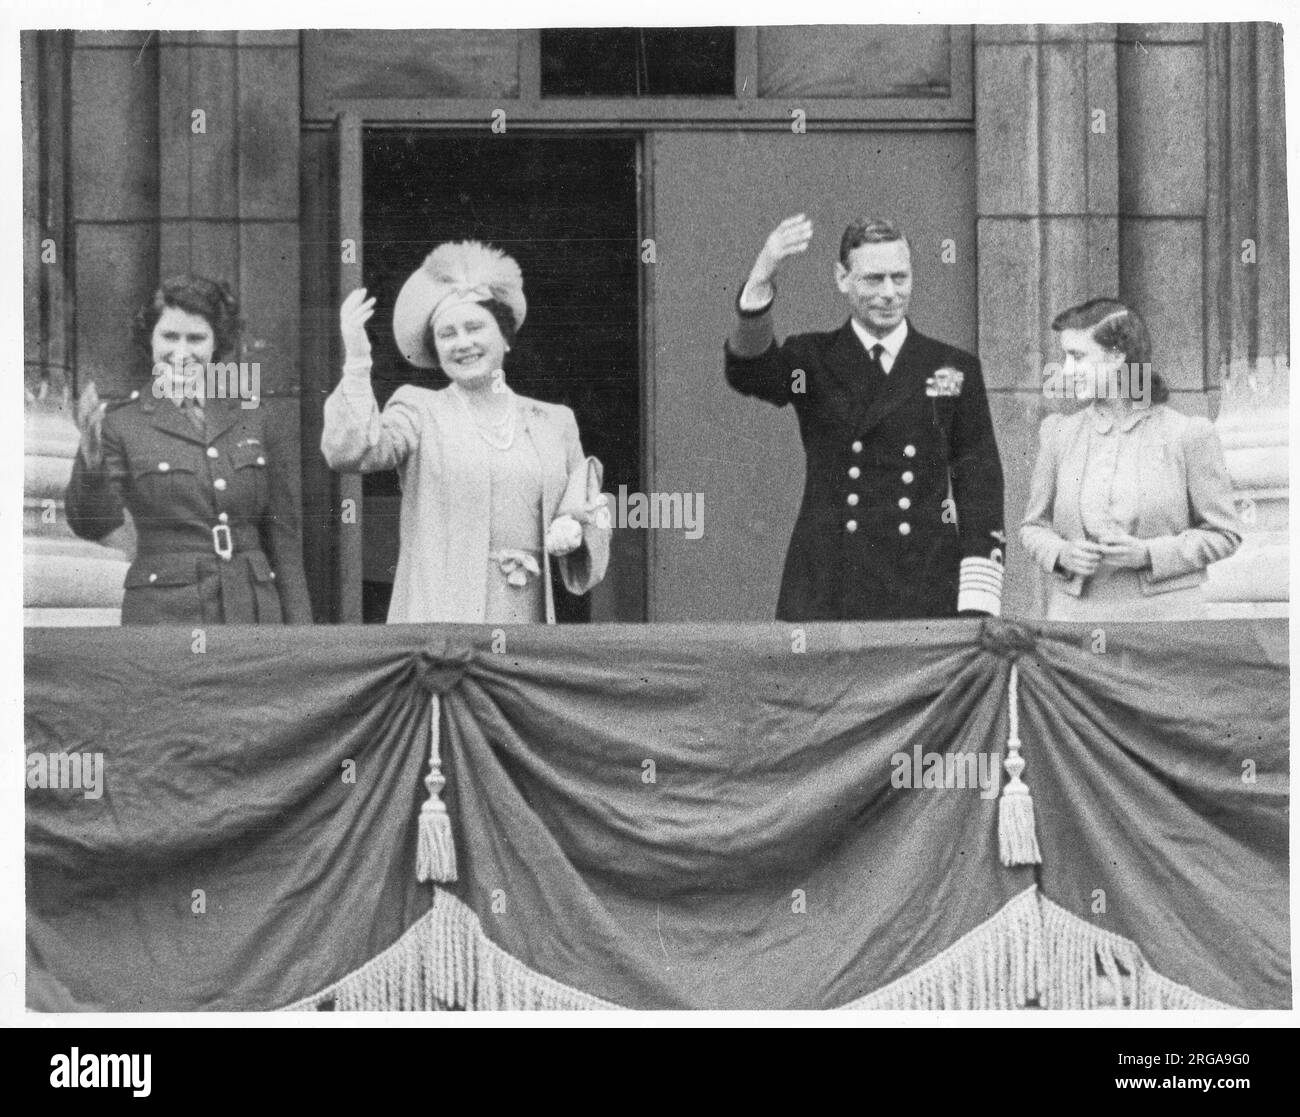 Vintage World War II photograph - the King, George VI of Great Britain accompanies by the Queen and Princesses Elizabeth and Margaret on the balcony of Buckingham Palace, VE Day celebration. Stock Photo